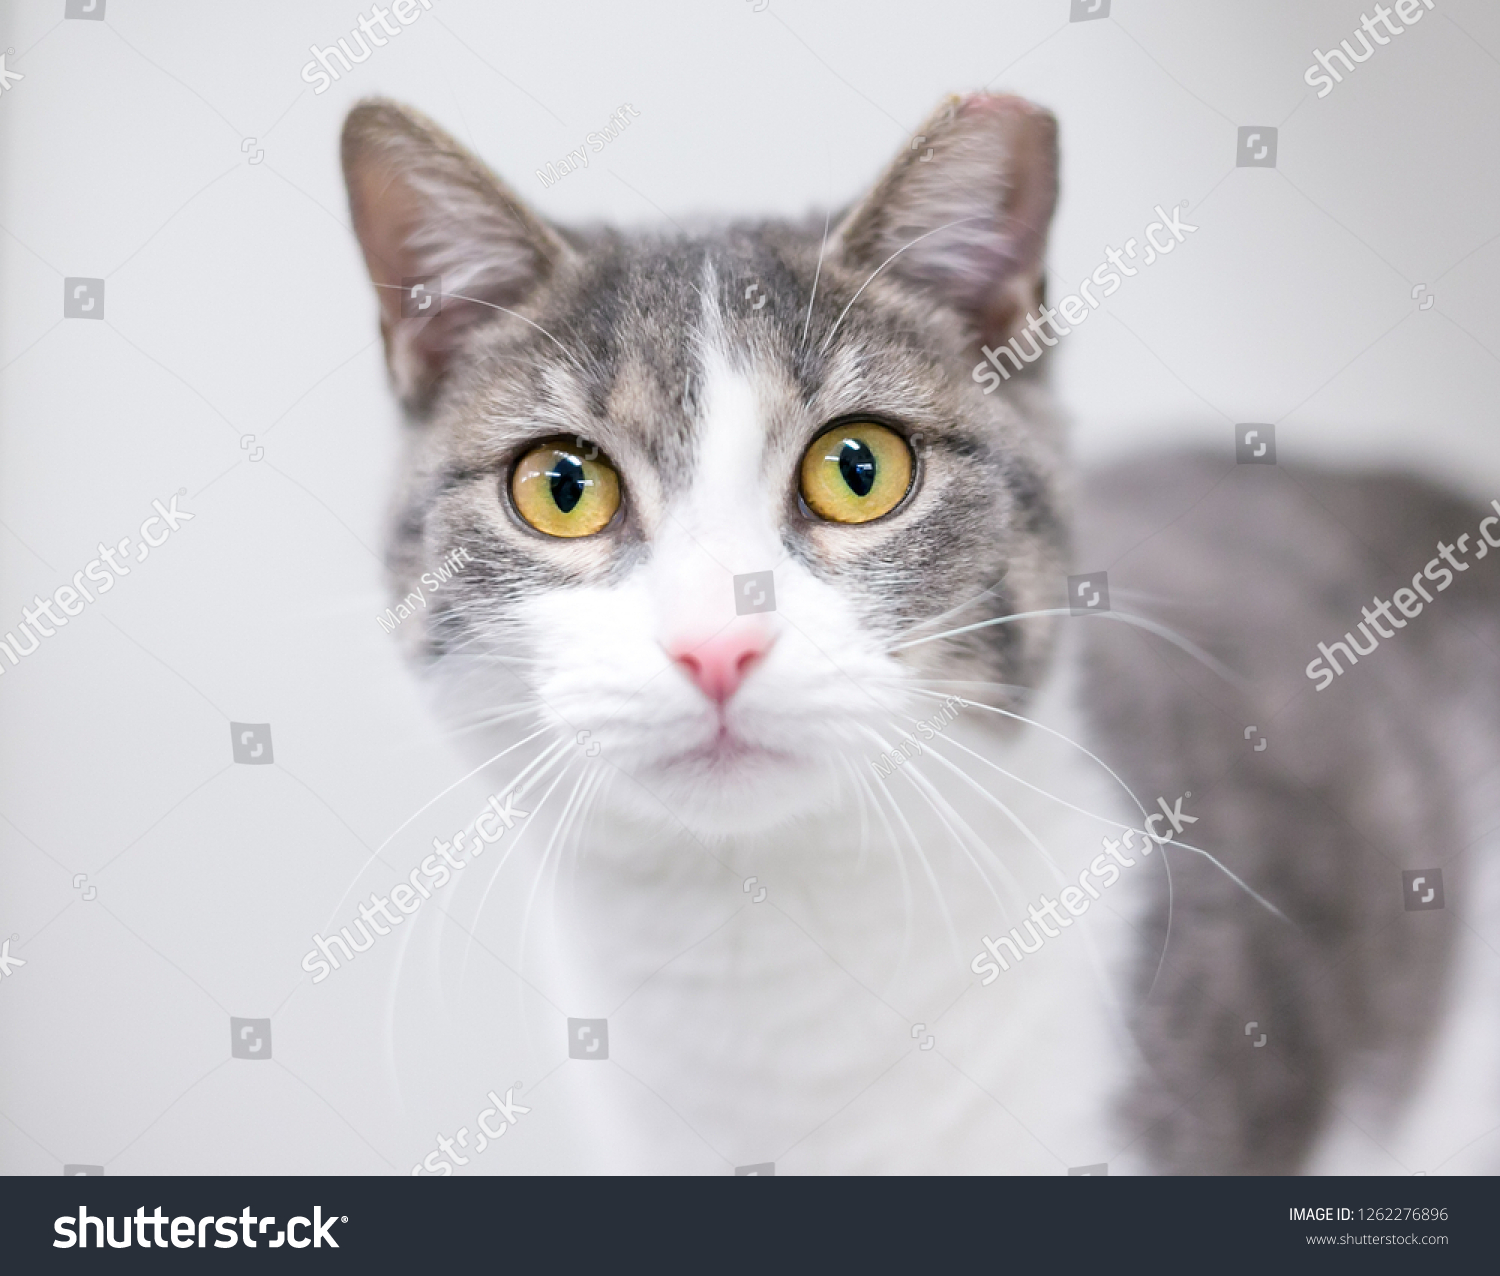 grey and white shorthair cat